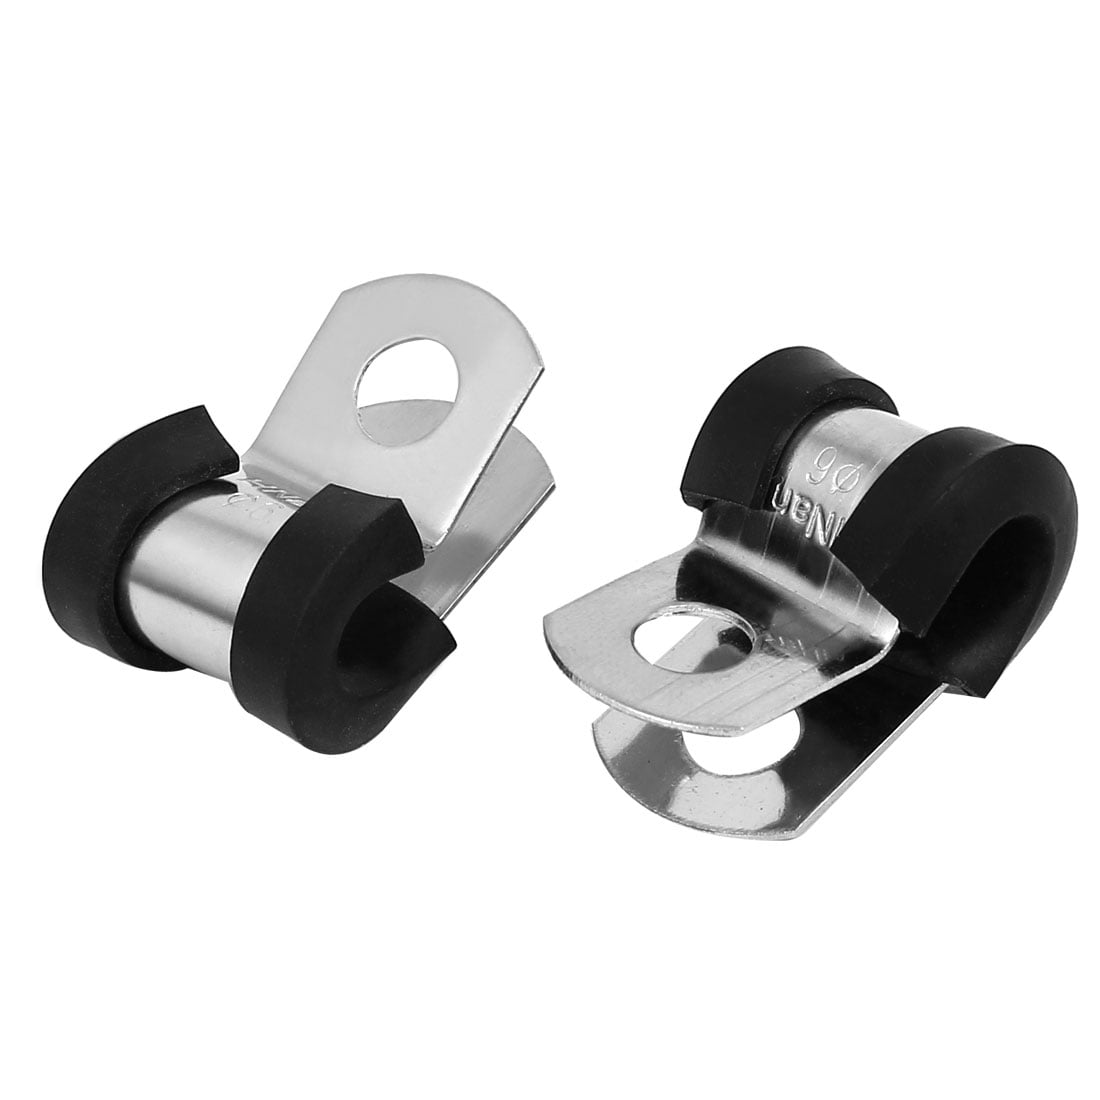 6mm Dia EPDM Rubber Lined P Shaped Cable Hose Pipe Clamps Clips 2pcs